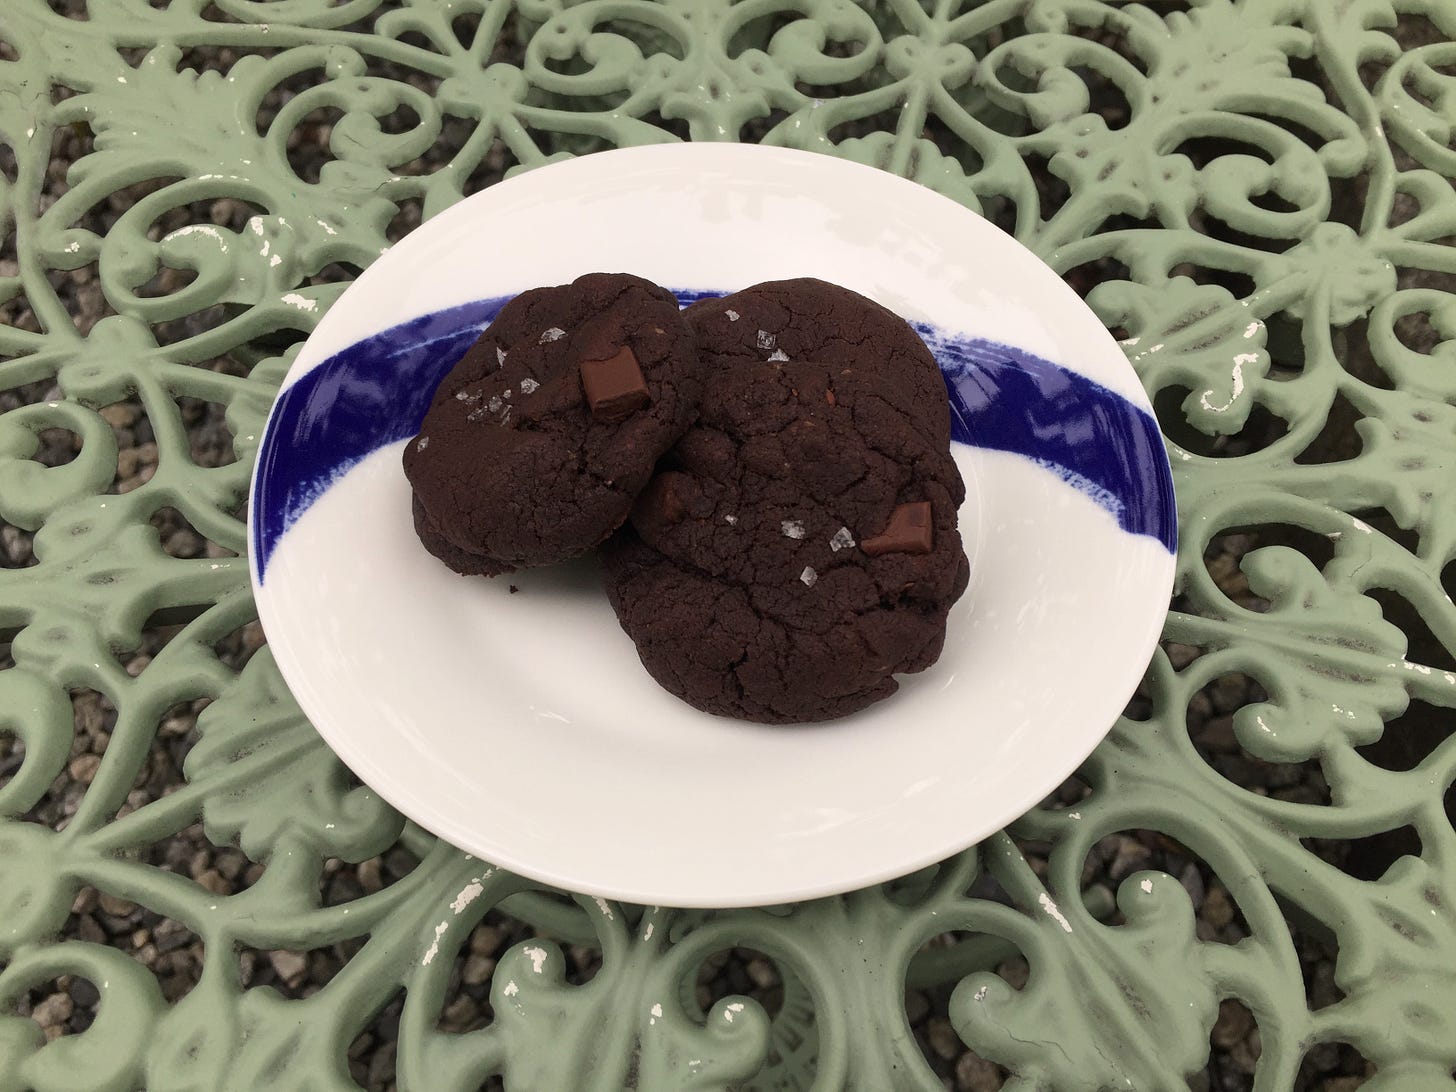 On a mint green wrought-iron table is a small white plate with a blue stripe, which holds three double chocolate cookies with flakes of salt on the tops.